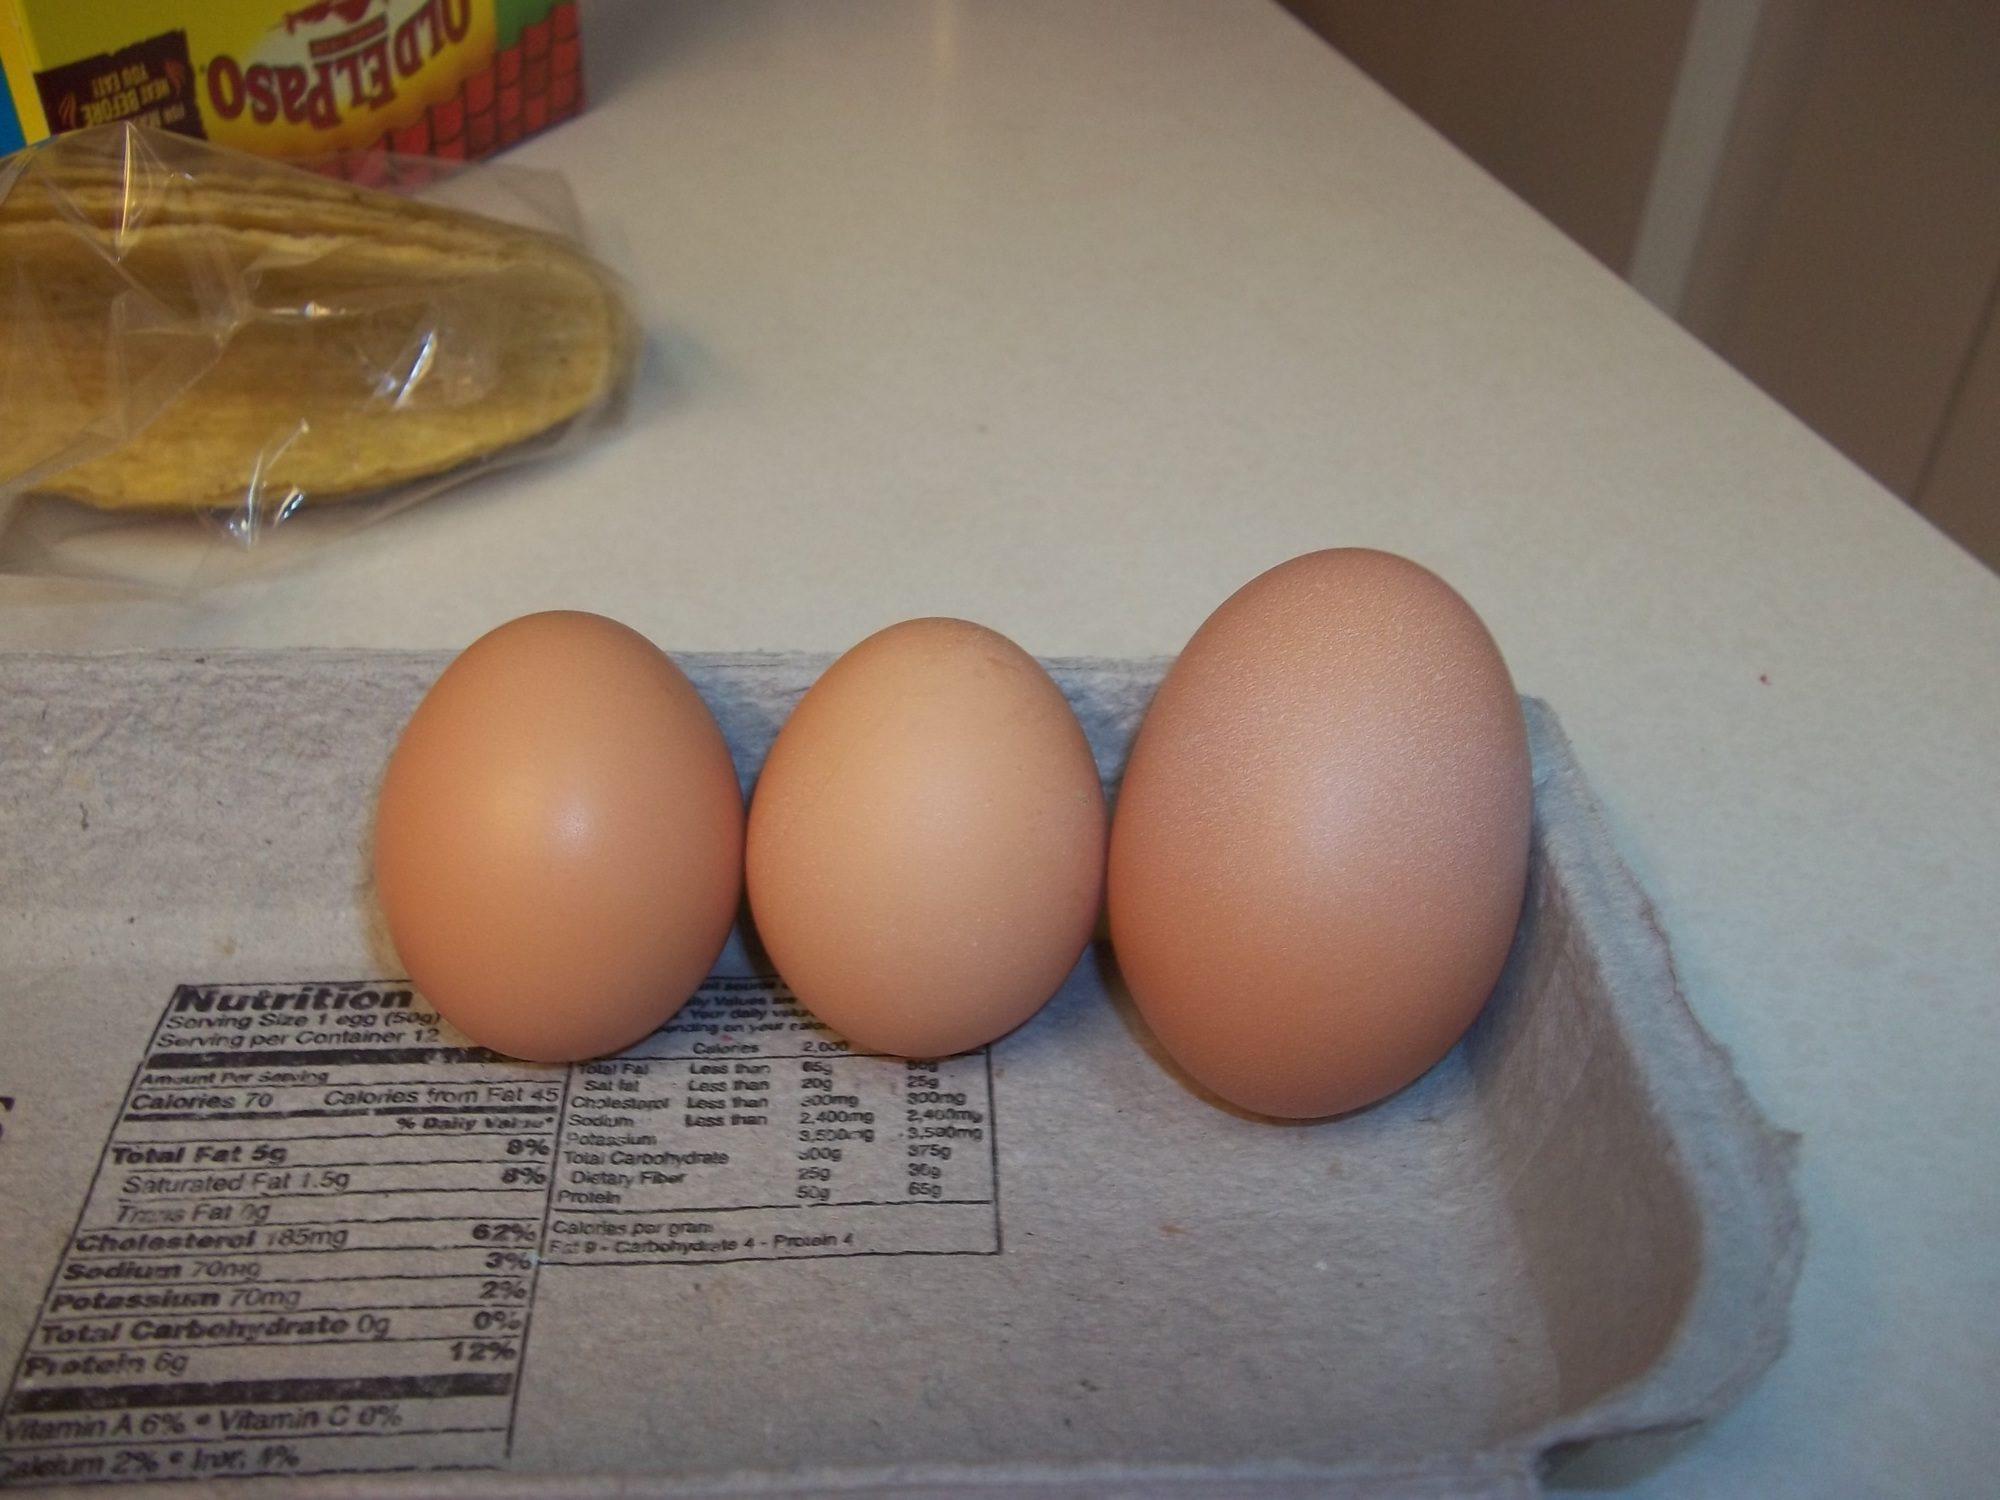 The 3 eggs we got in one day.